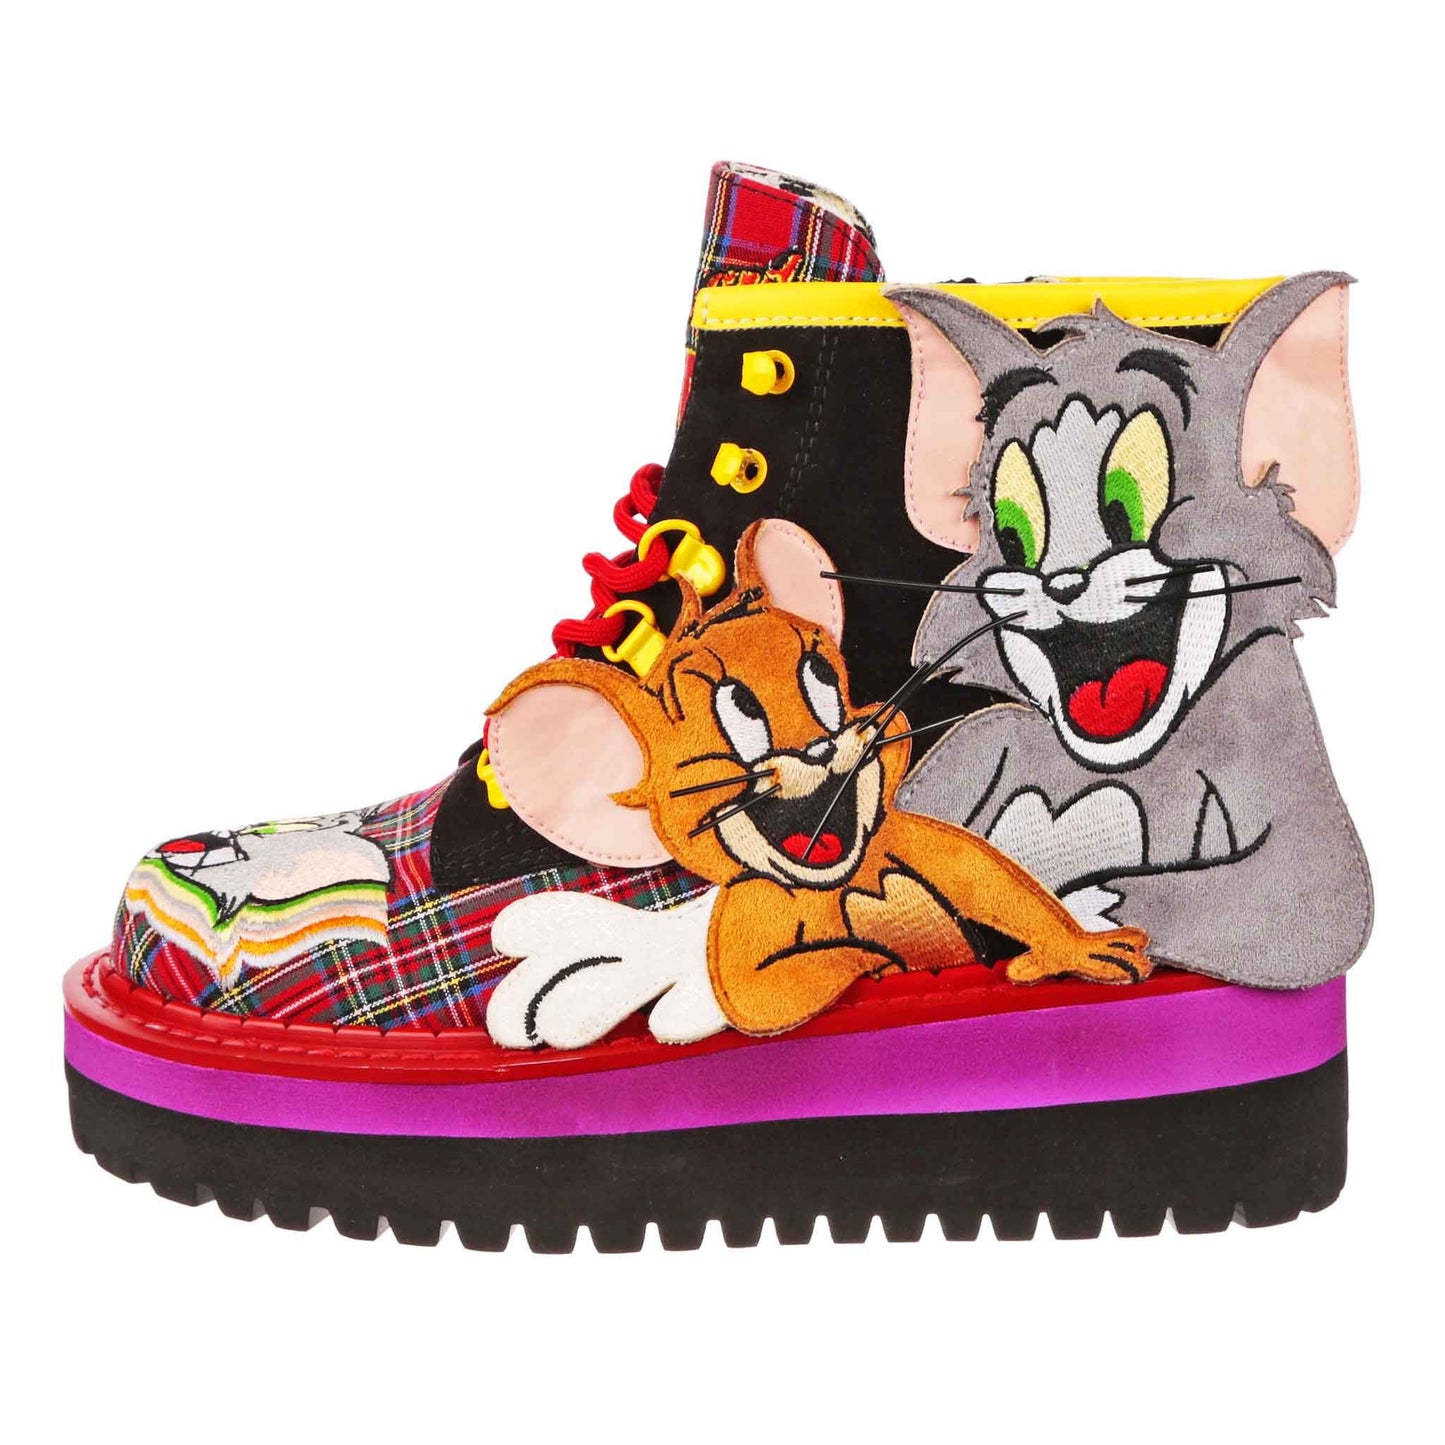 Irregular Choice Tom and Jerry Mouse Sandwich